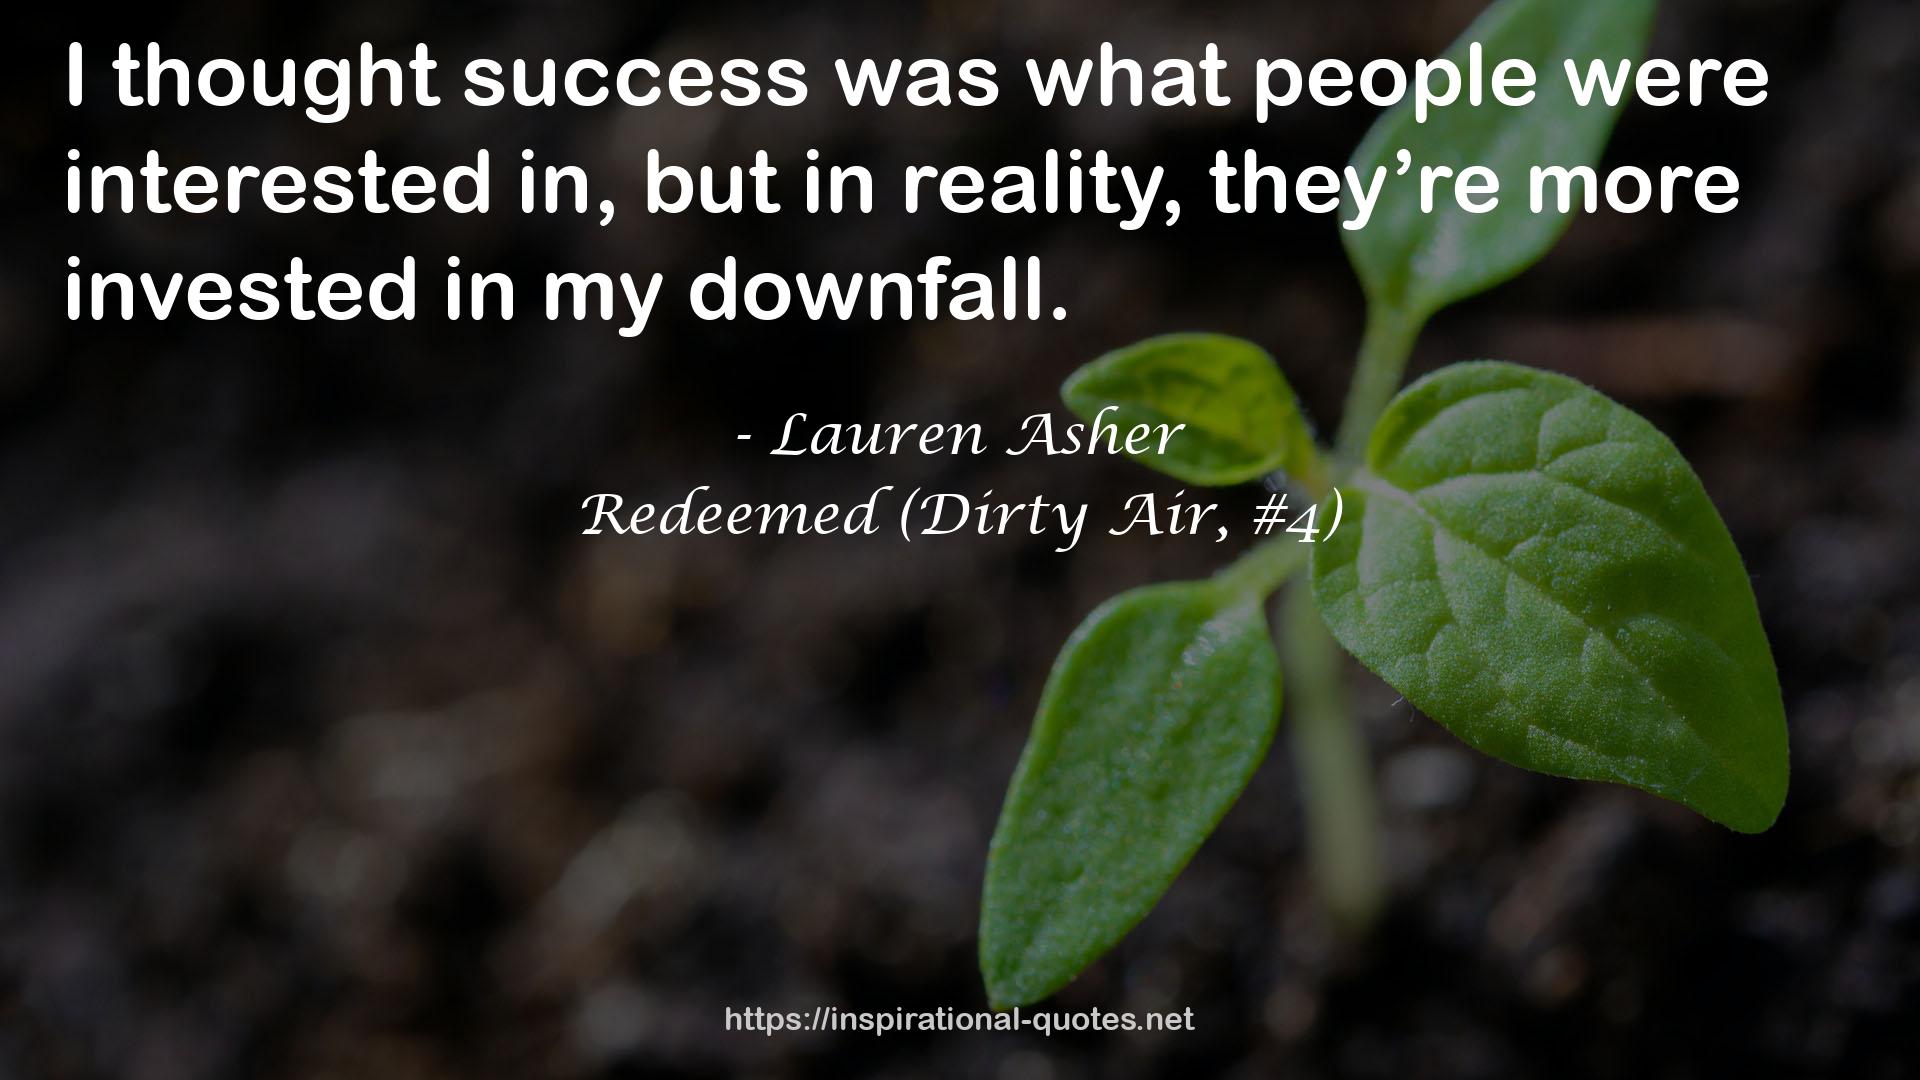 Redeemed (Dirty Air, #4) QUOTES